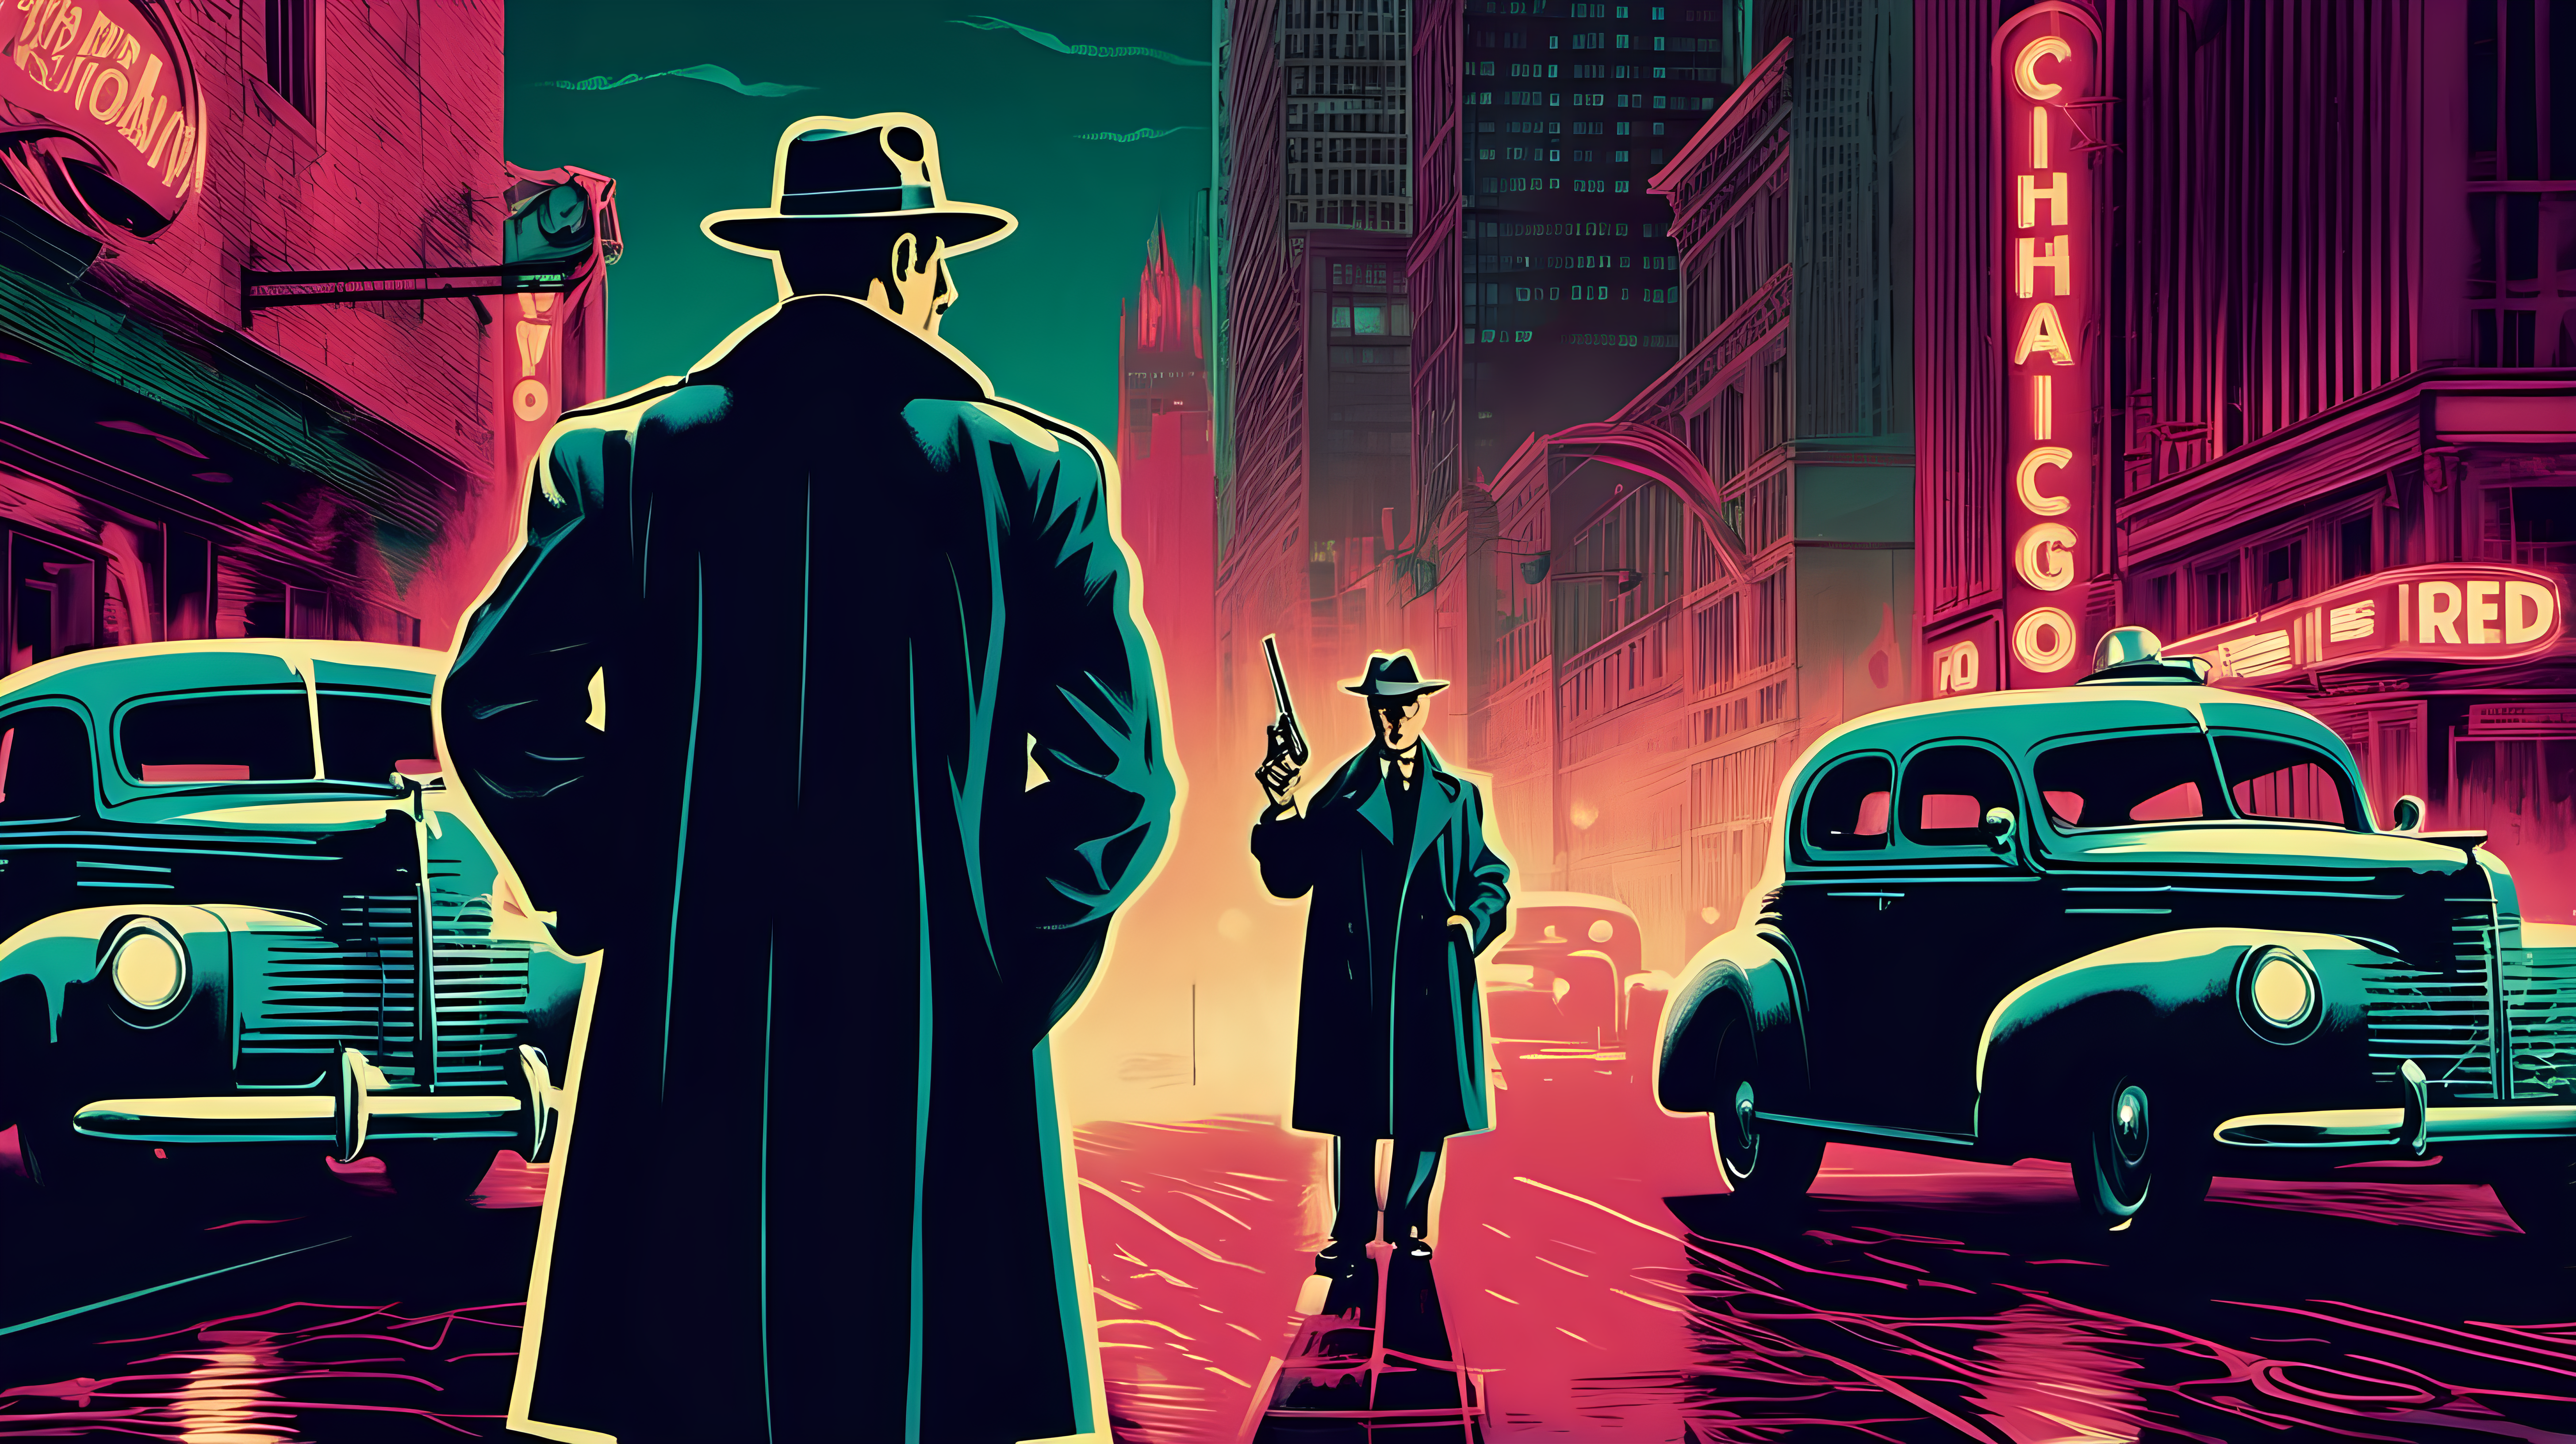 A detective with a revolver standing in the foreground on a downtown neon Chicago street circa 1940. Vintage retro style.